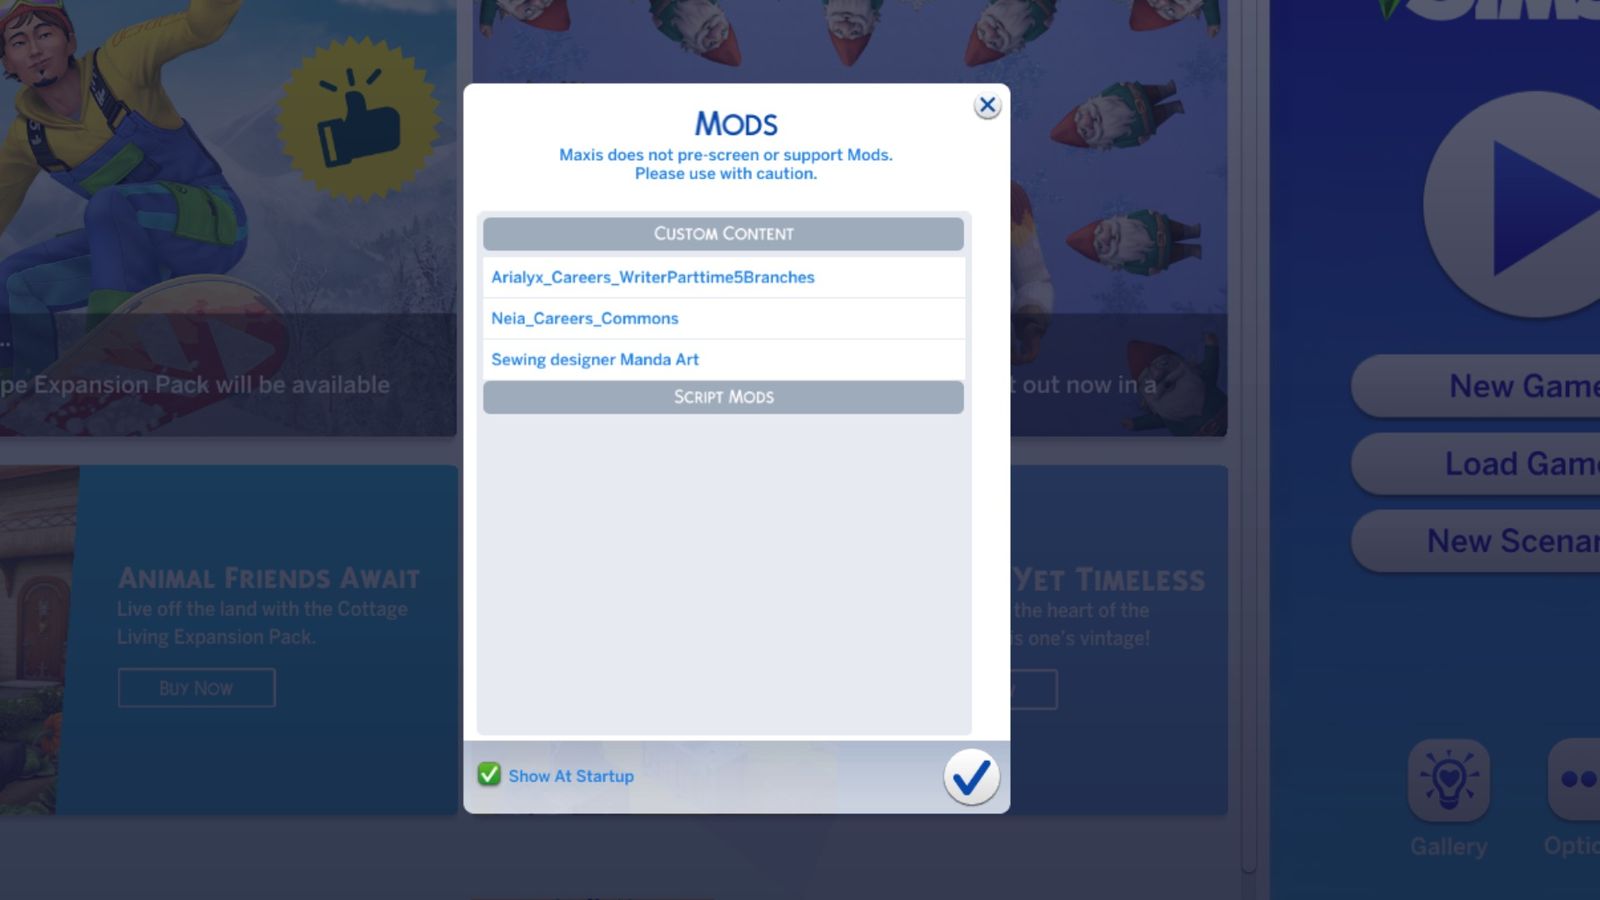 The Sims 4 installed mods screen. The image shows a small preview box that appears before you load into the game. The box lists all of the mods that you currently have installed in the game. 